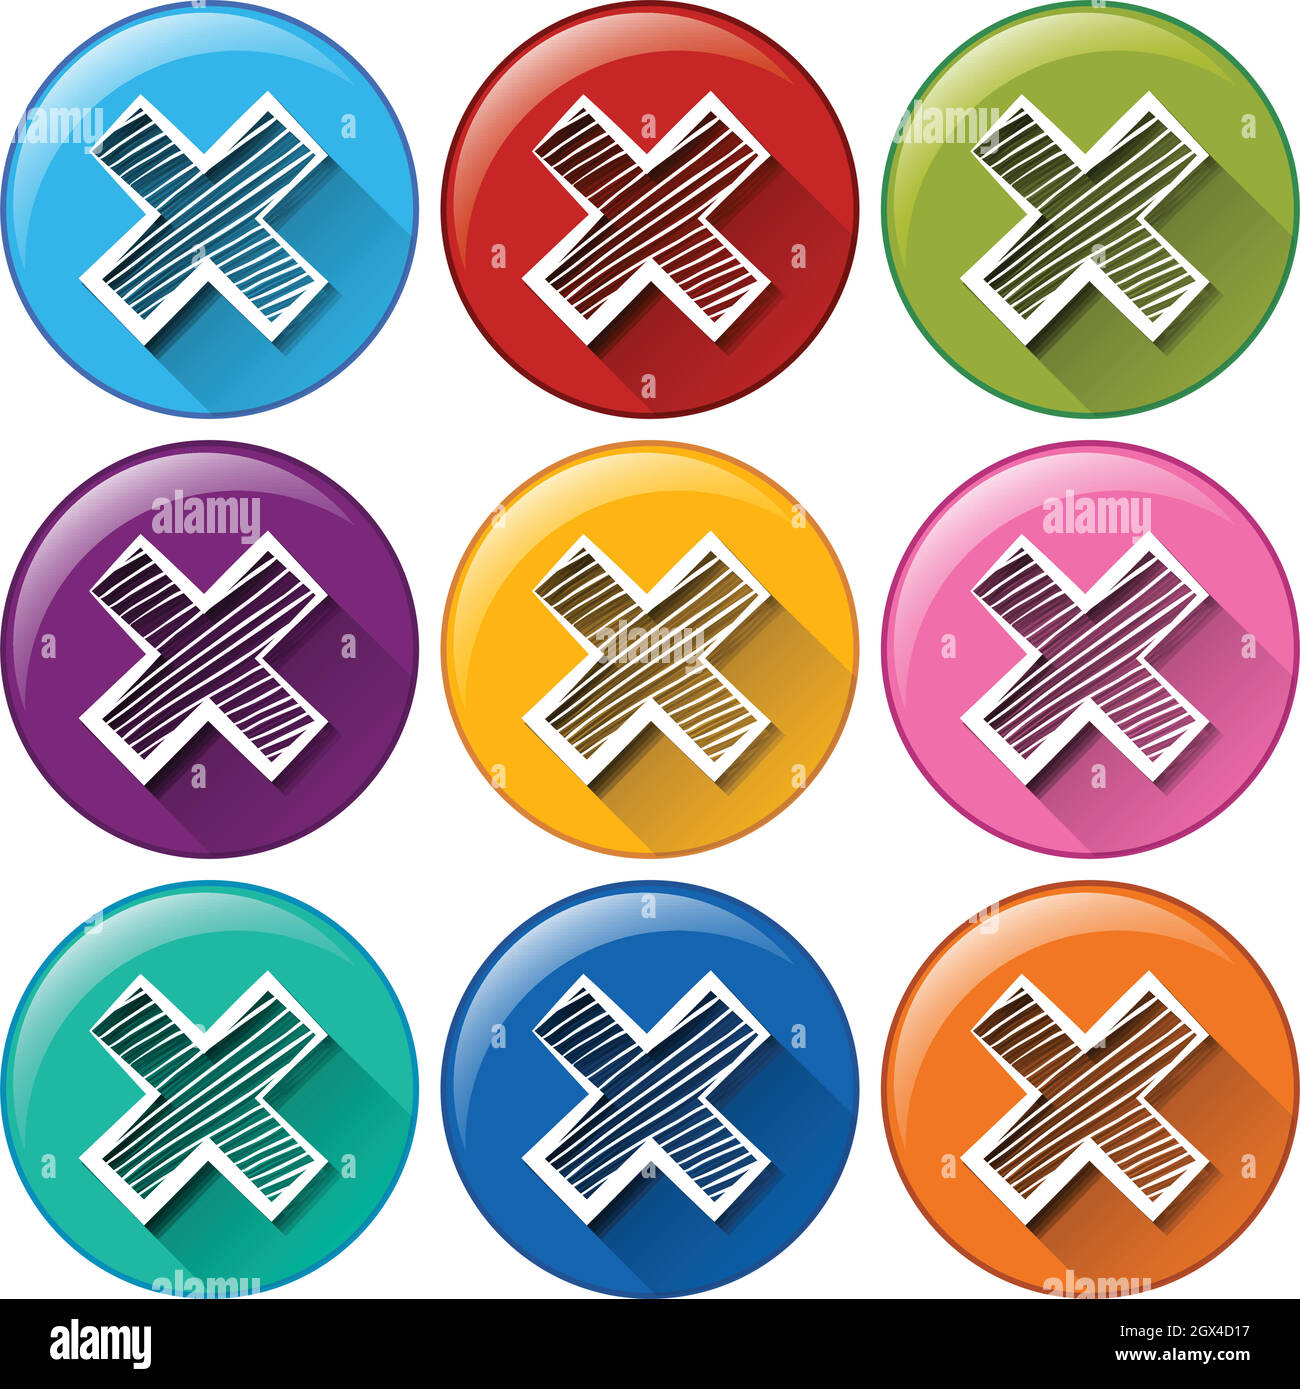 Circle buttons with multiplication operations Stock Vector